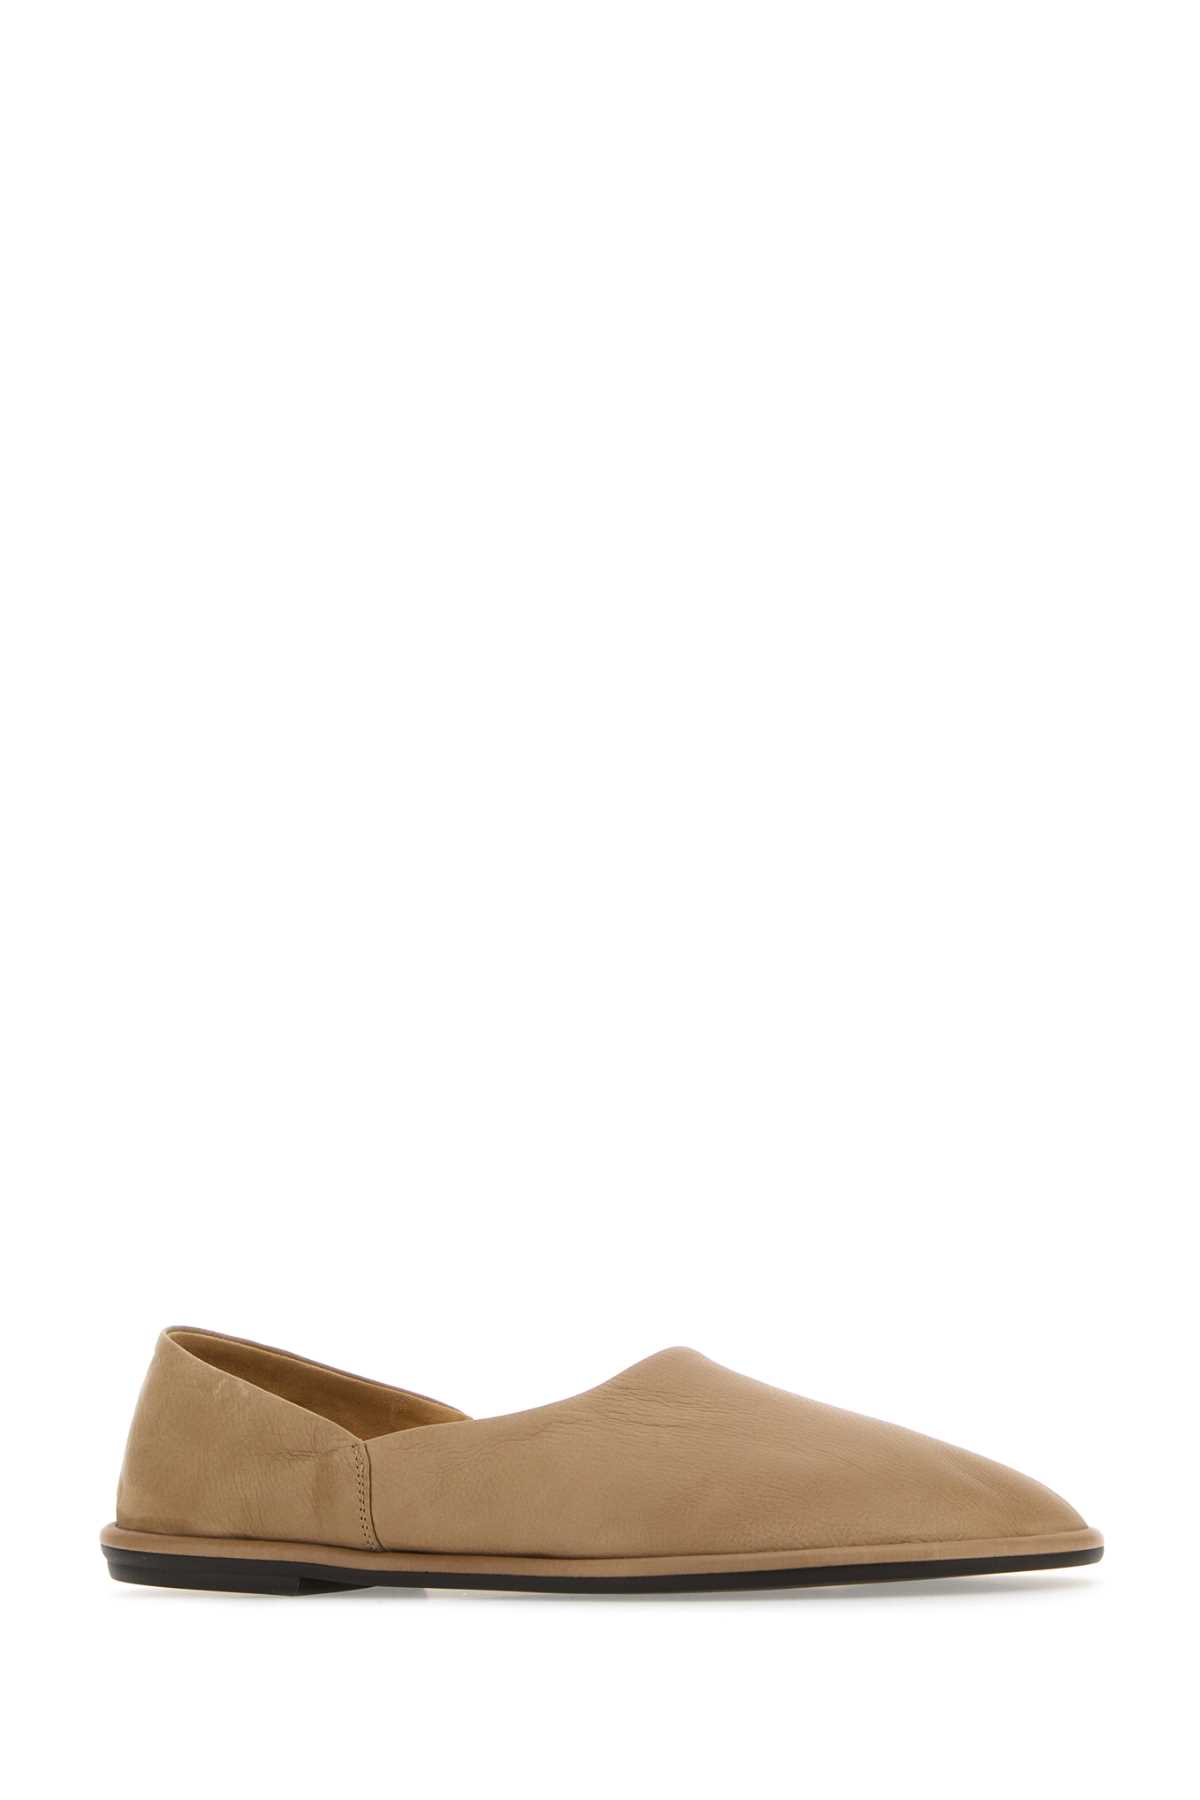 THE ROW BEIGE LEATHER CANAL SLIP ONS